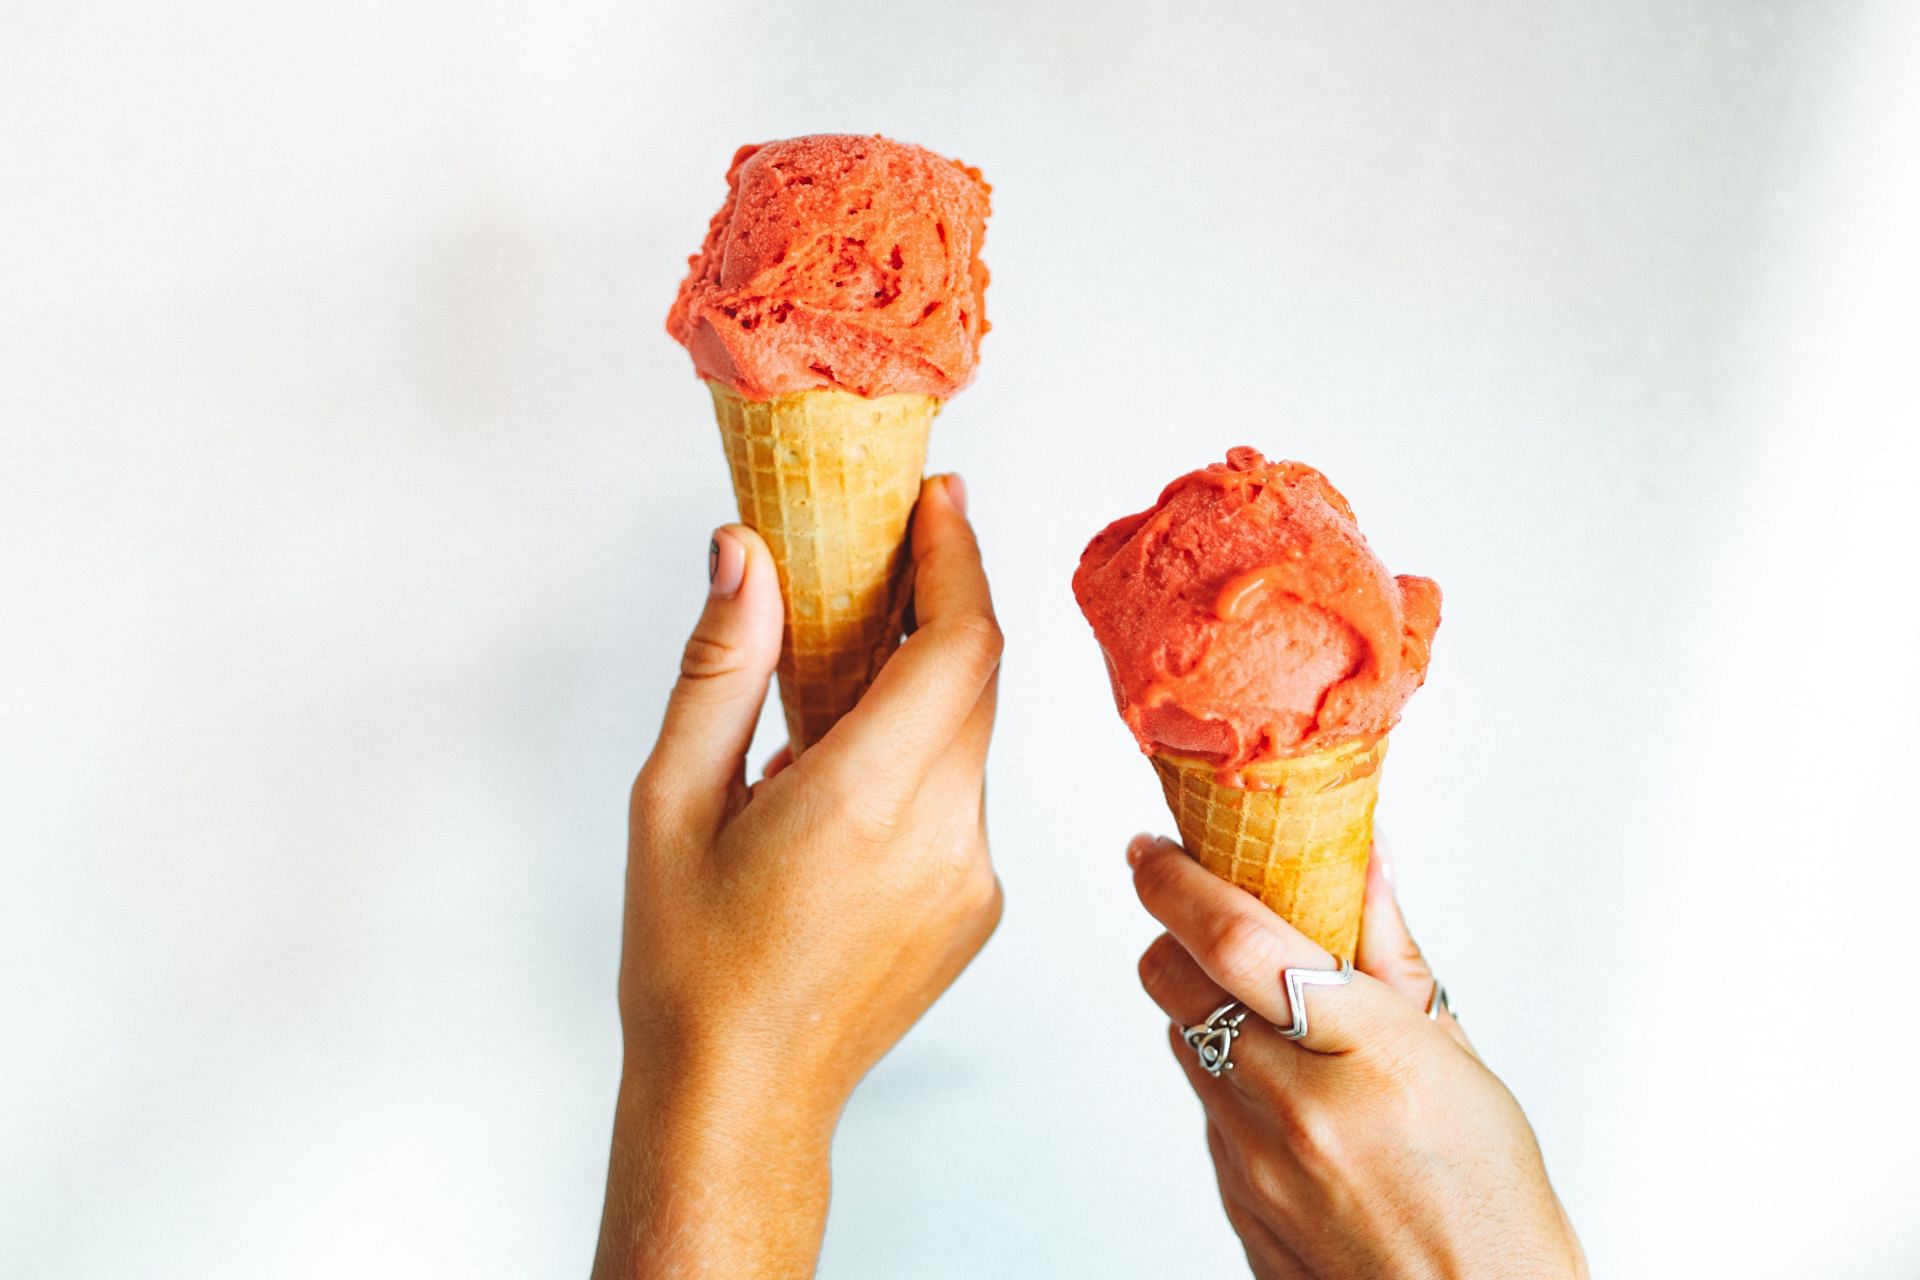 Is ice cream healthy? Yes, it can be had in moderation.(image via Pexels/Roman)